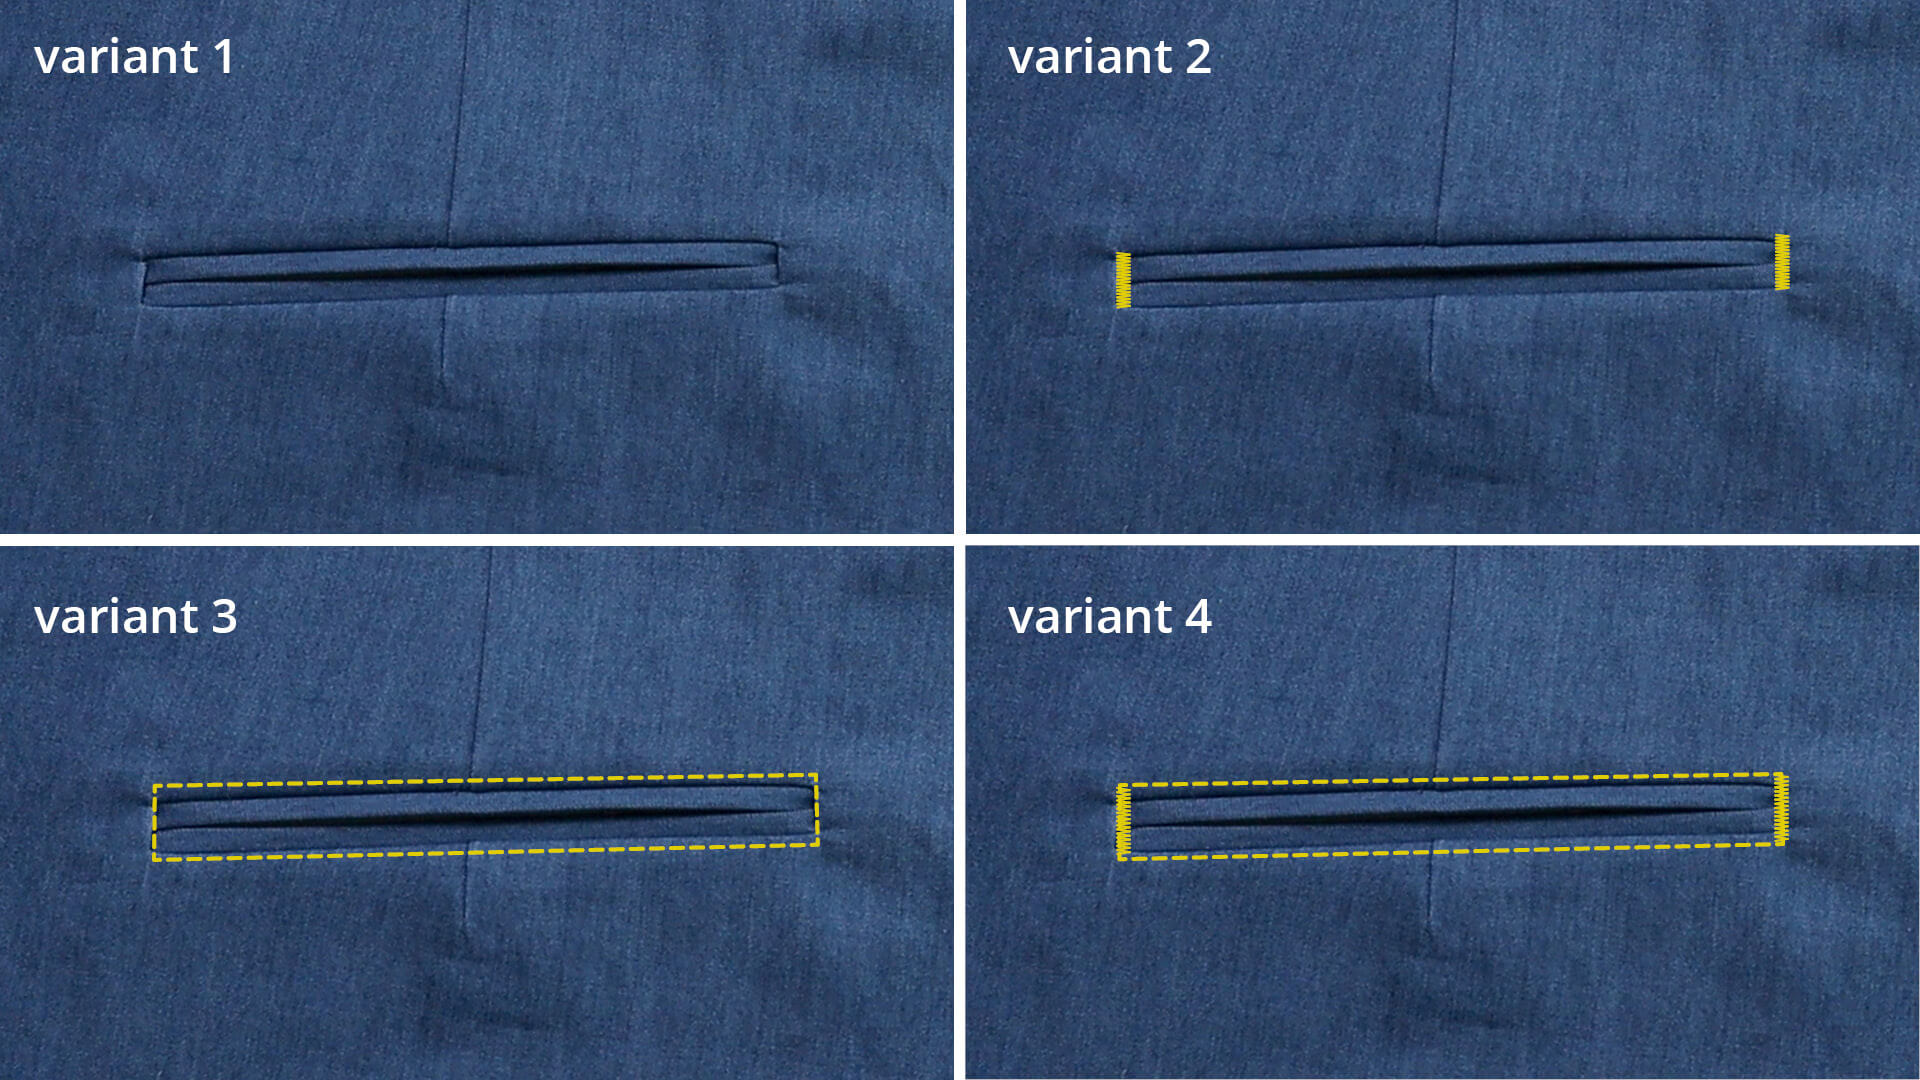 The picture shows various options for stitching the double welt pockets.